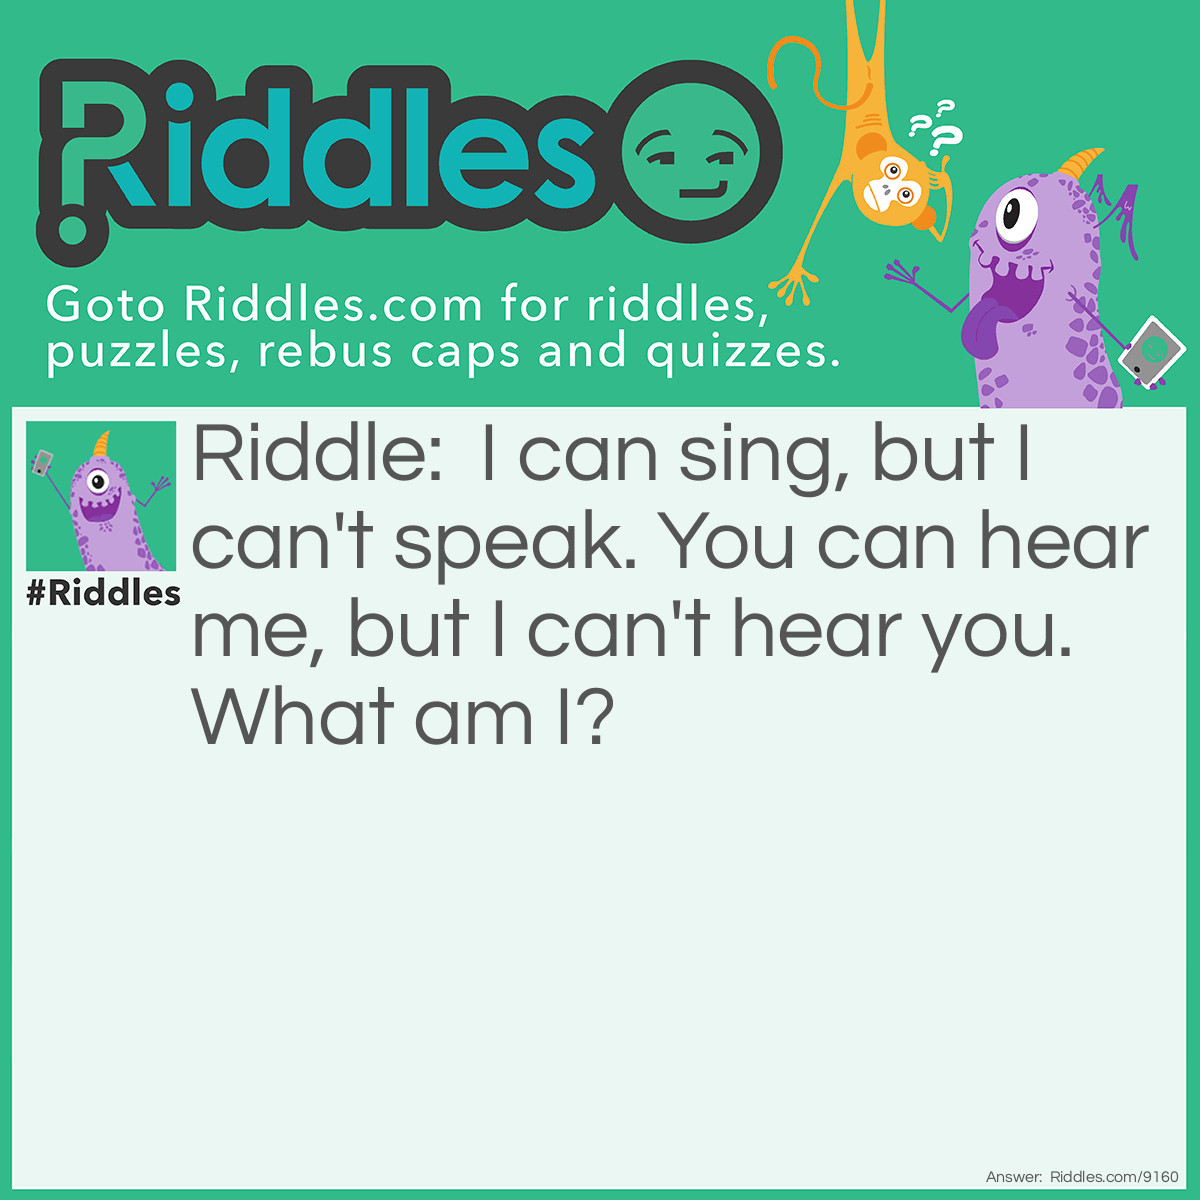 Riddle: I can sing, but I can't speak. You can hear me, but I can't hear you. What am I? Answer: A piano.